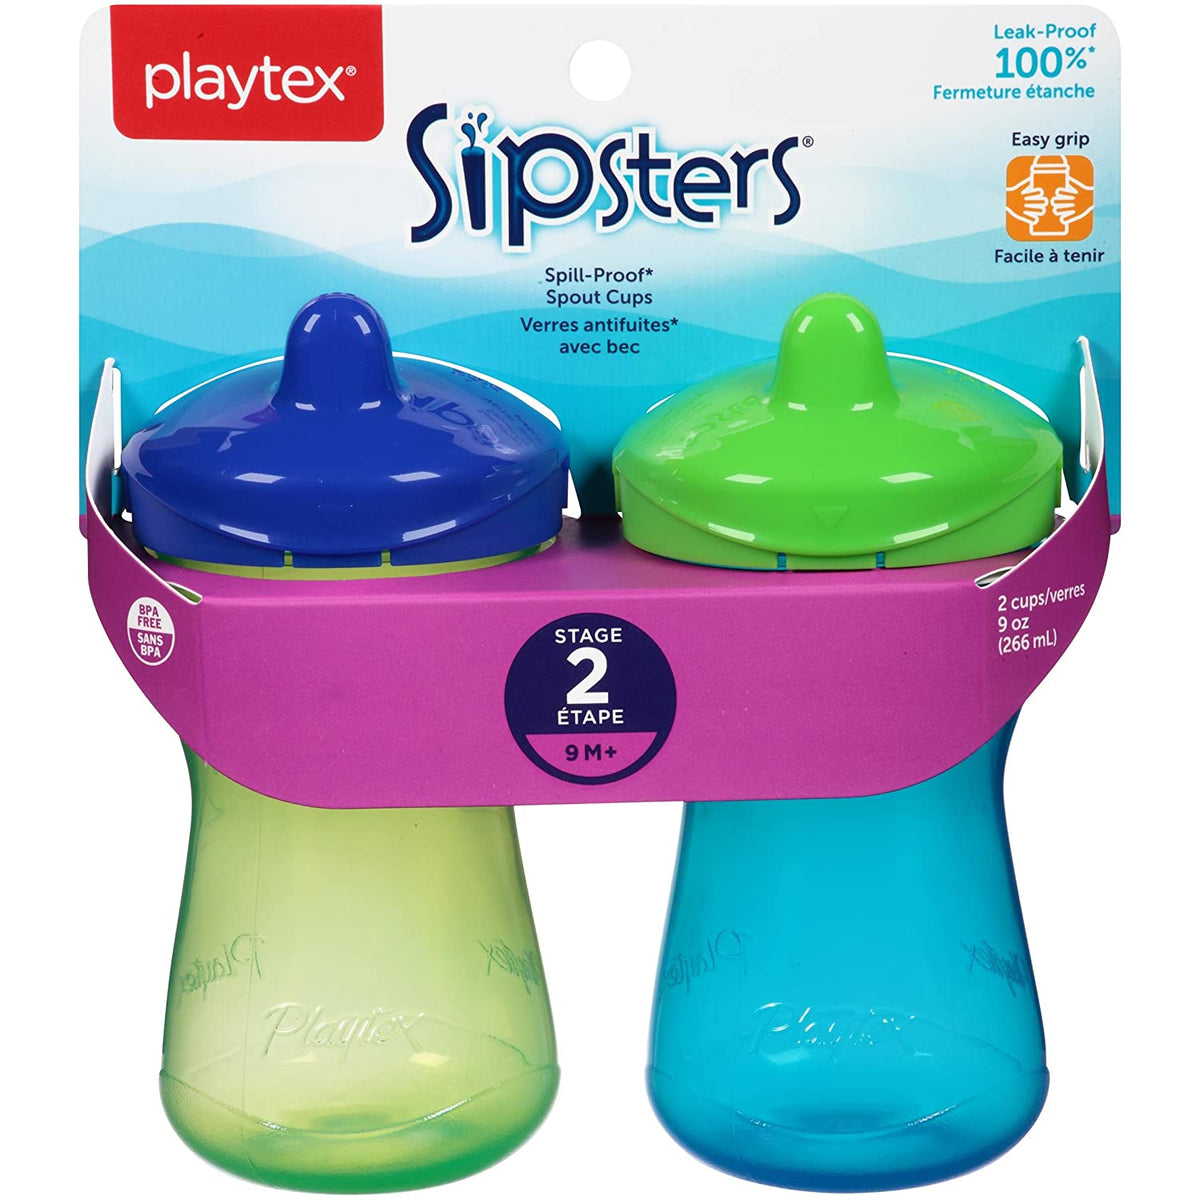 The Most Leak-Proof and Spill-Proof Sippy Cup